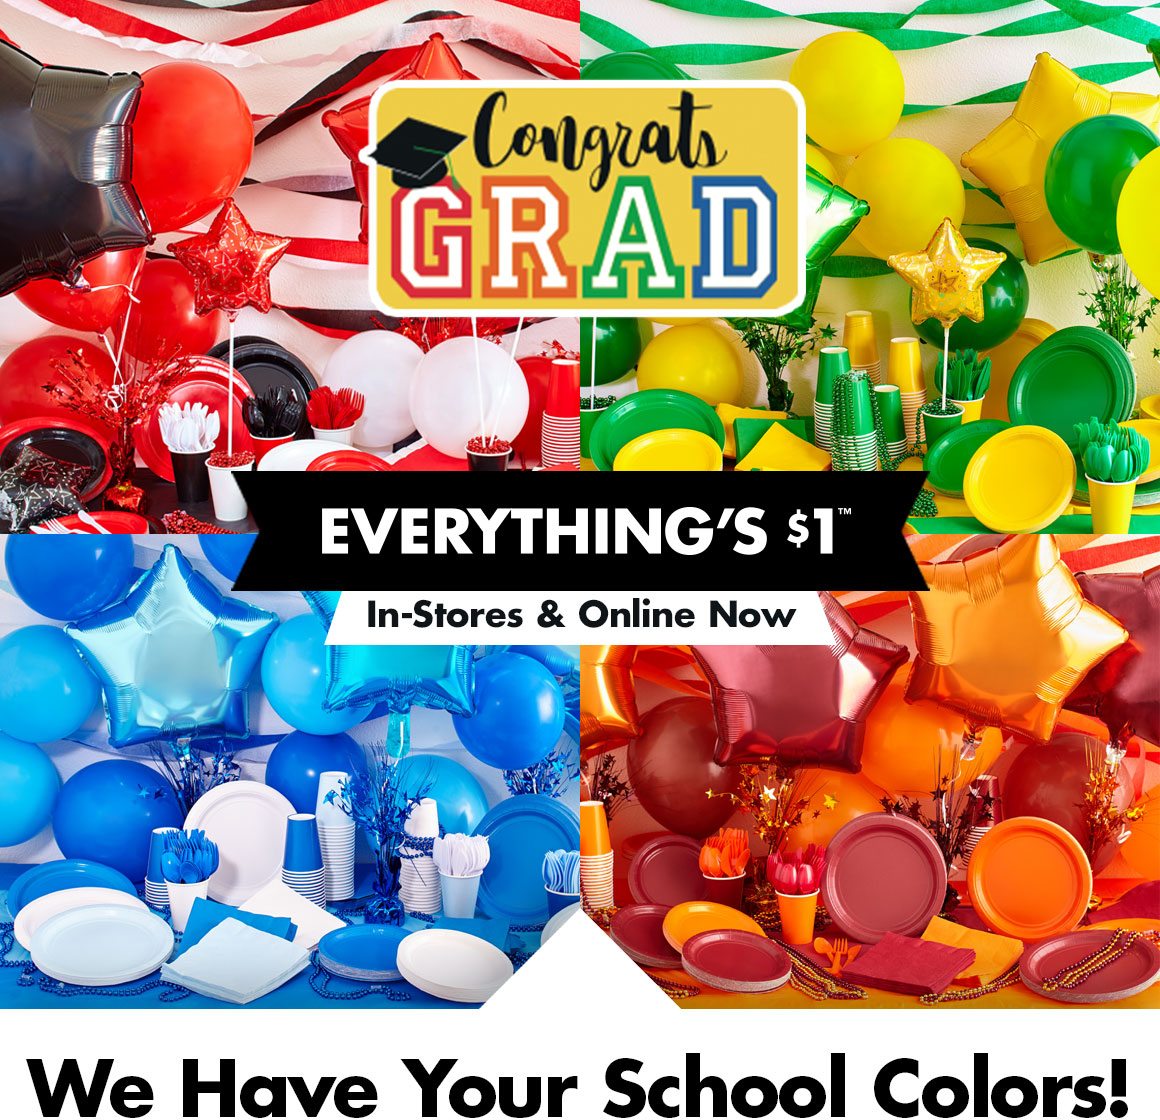 We Have Your School Colors!